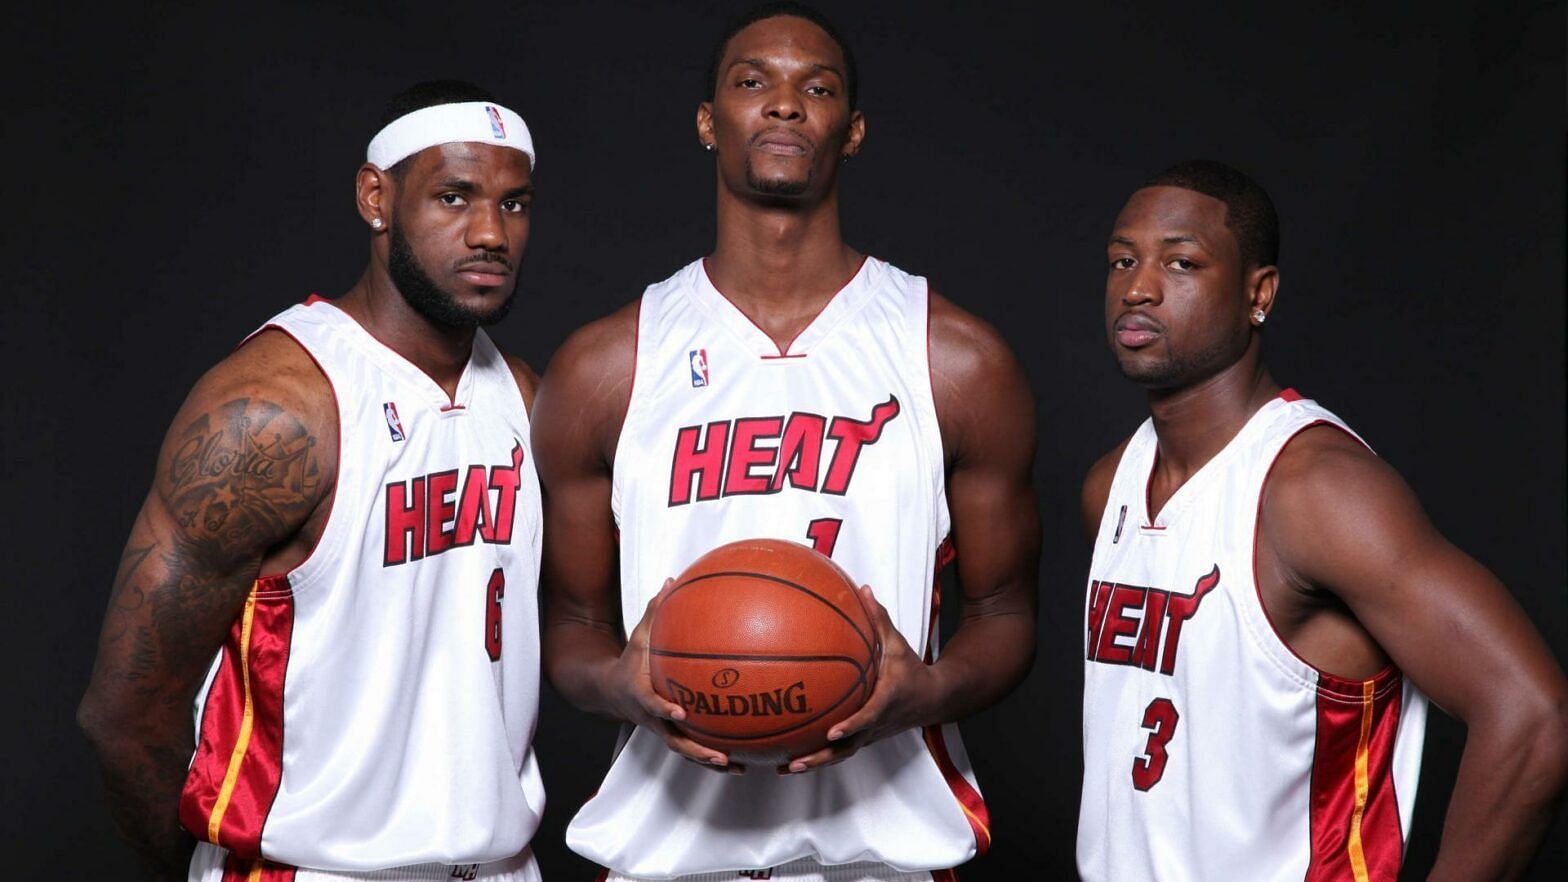 Chris Bosh and Dwyane Wade had to take smaller roles to accommodate LeBron James. [Photo: NBA.com]